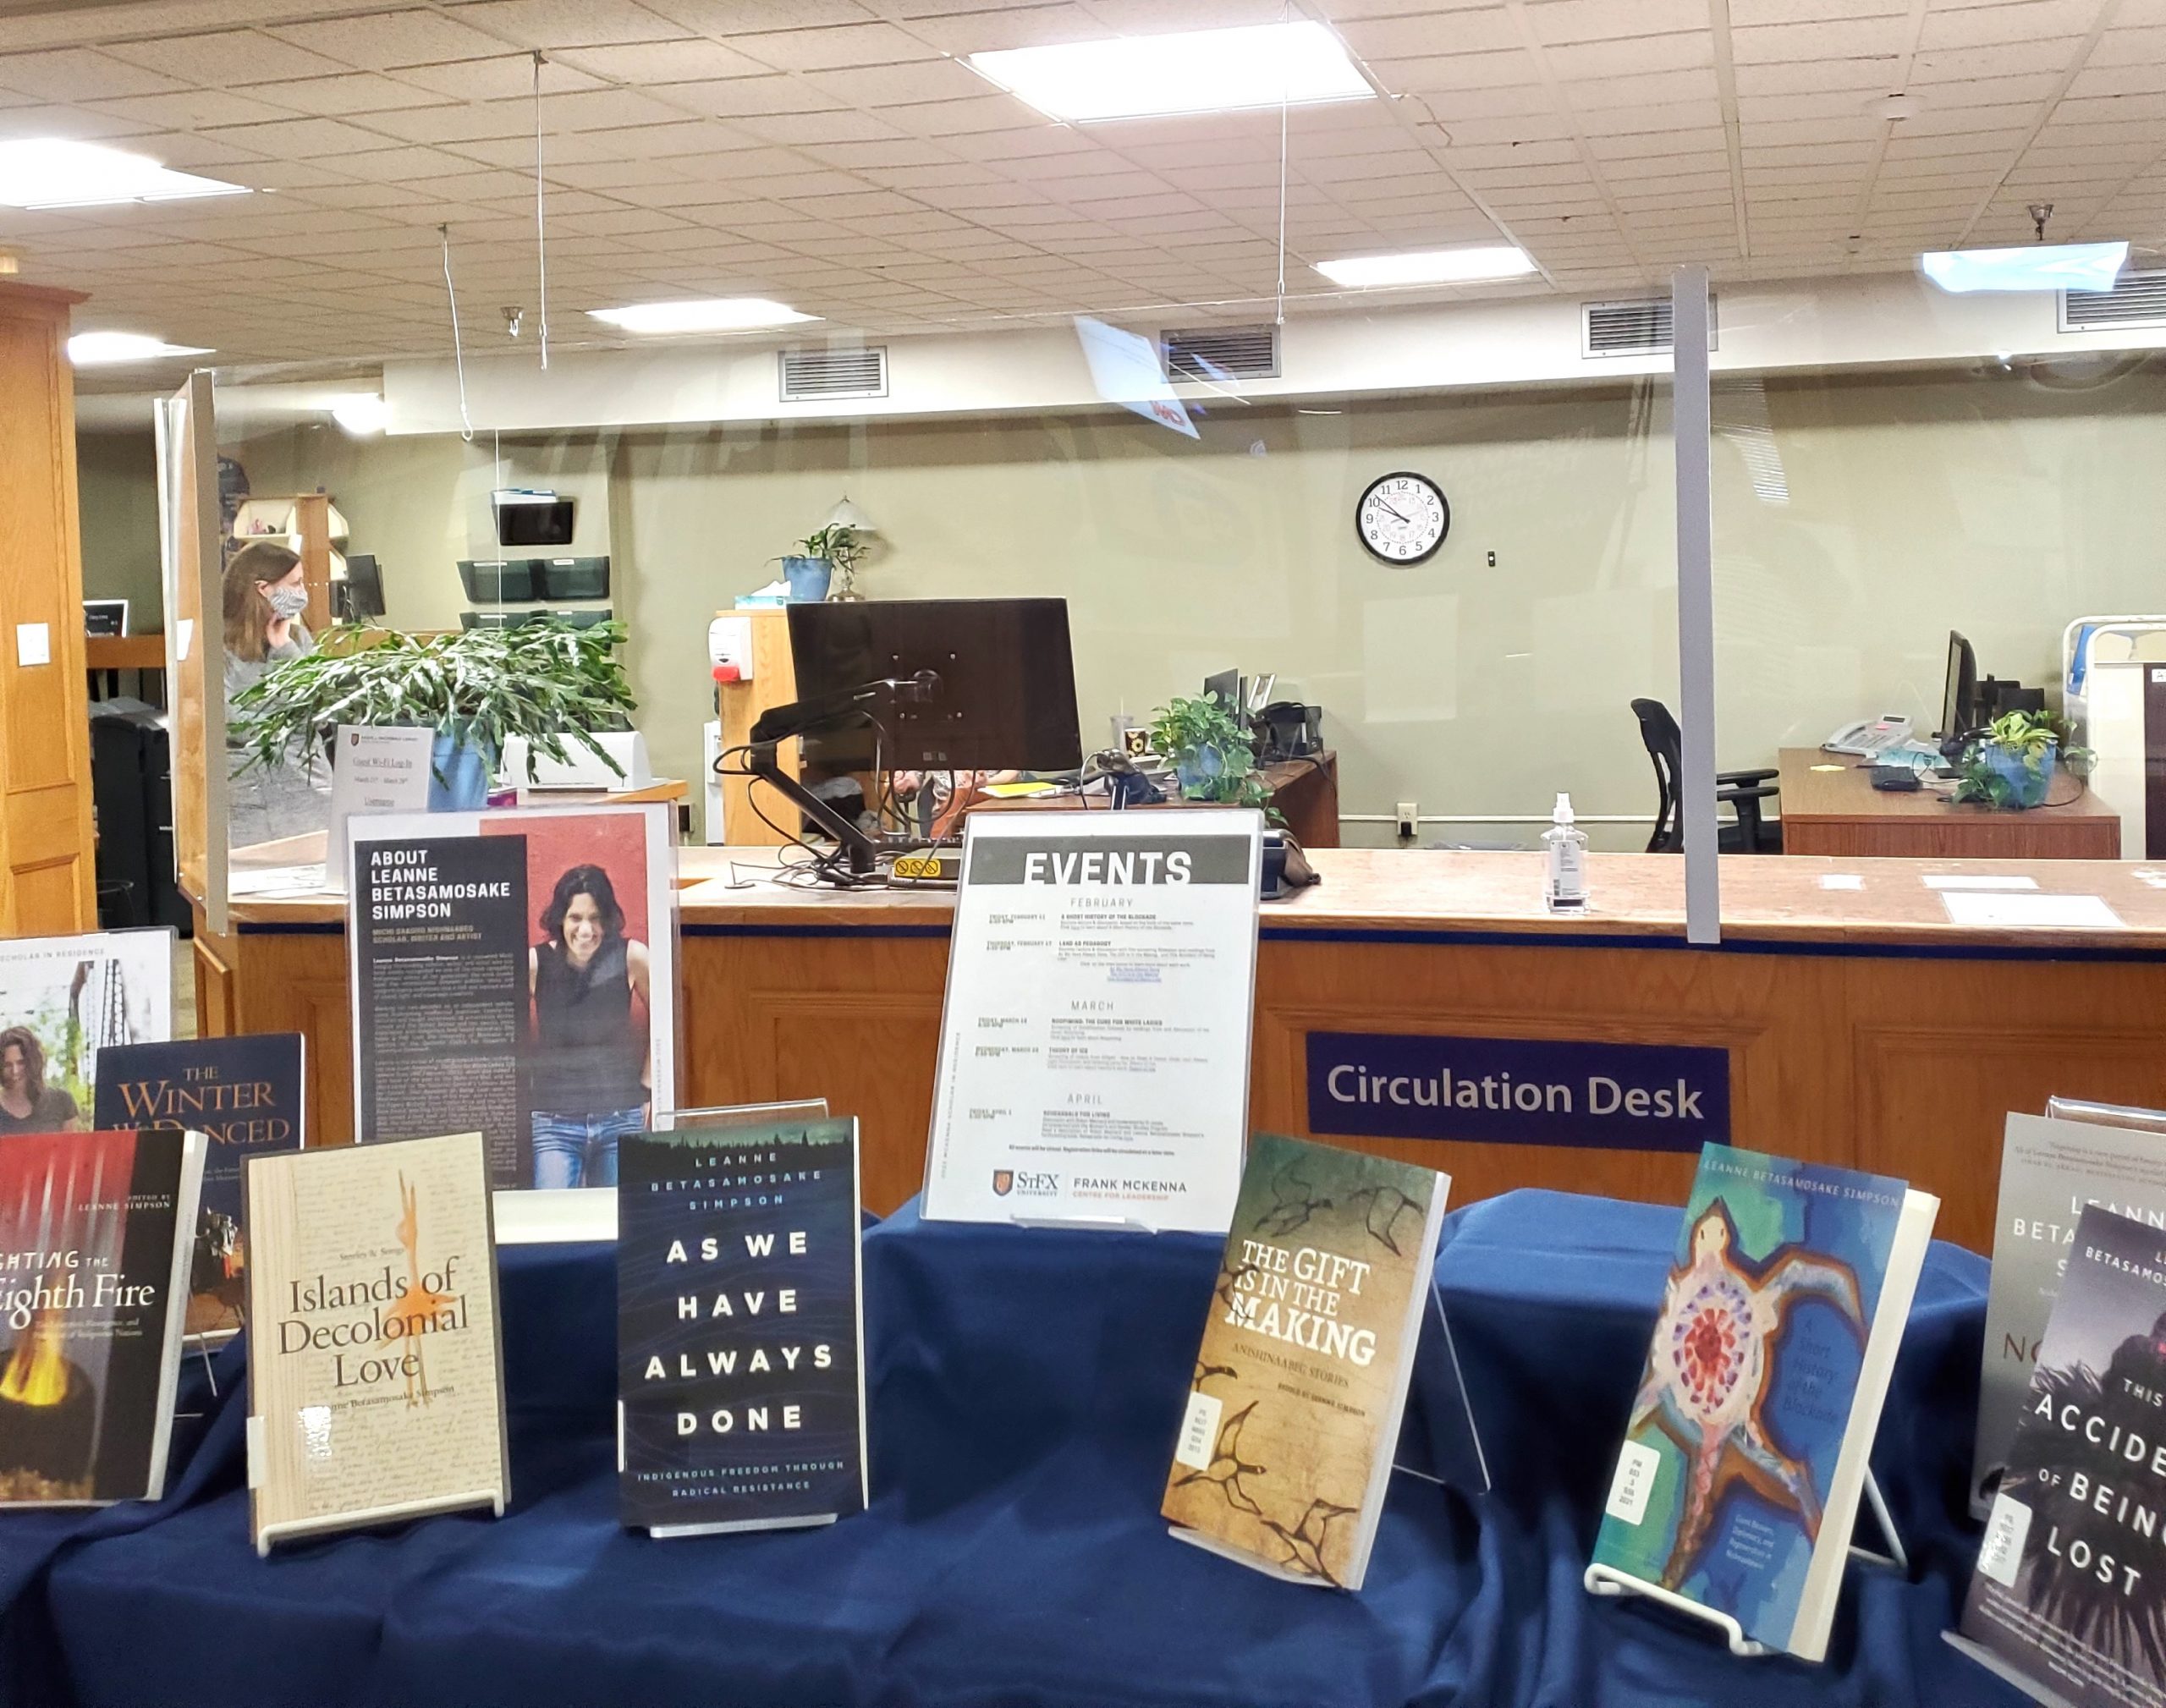 Photograph of the Angus L. Macdonald Library Access Services Desk (background) with a book display in the foreground